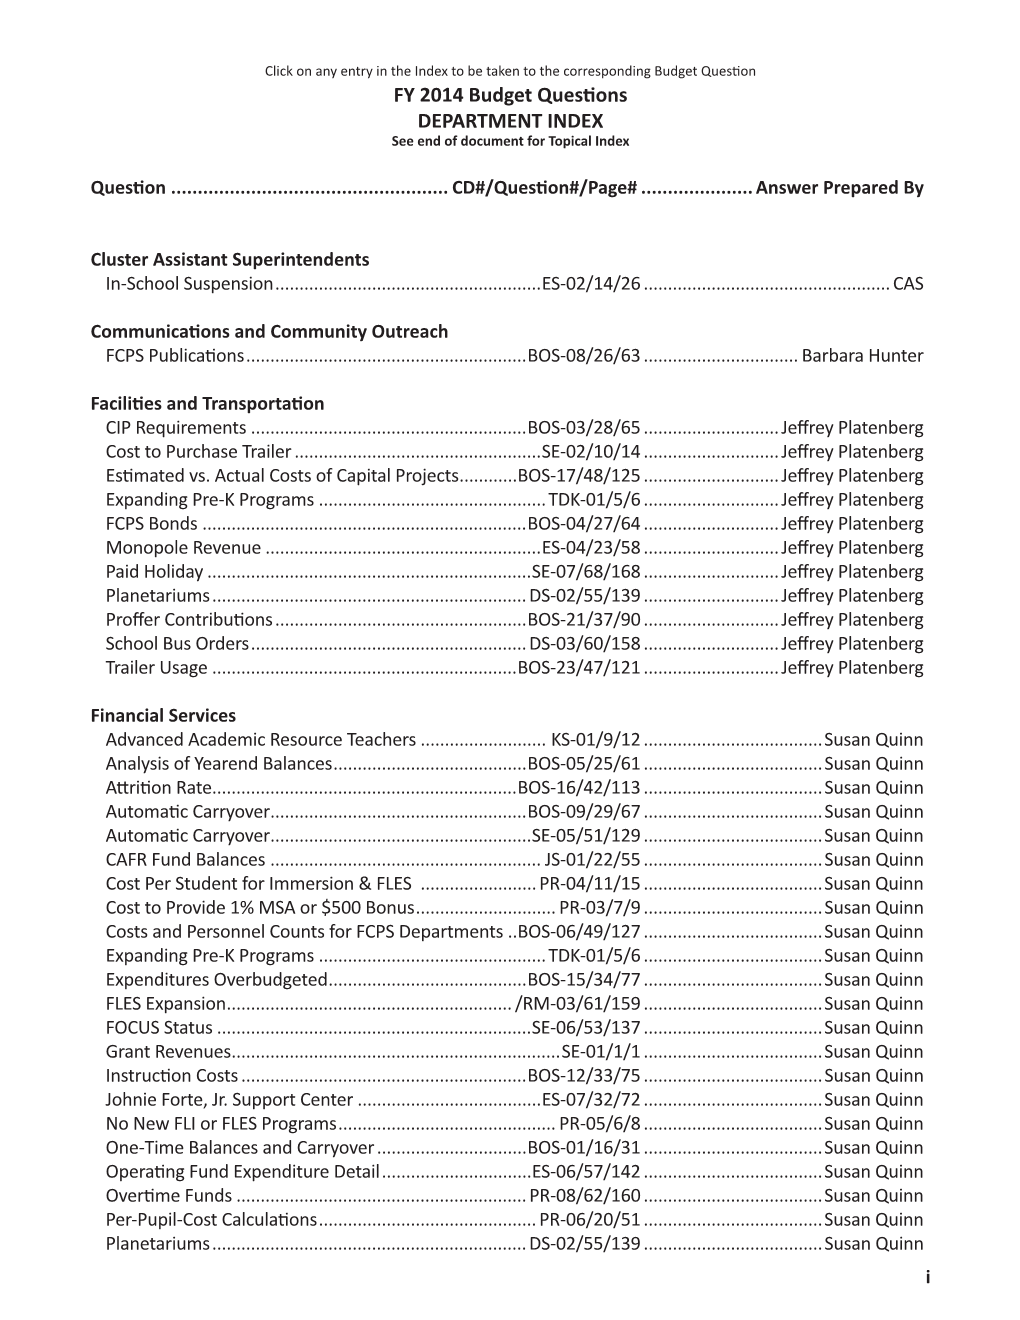 FY 2014 Budget Questions DEPARTMENT INDEX See End of Document for Topical Index